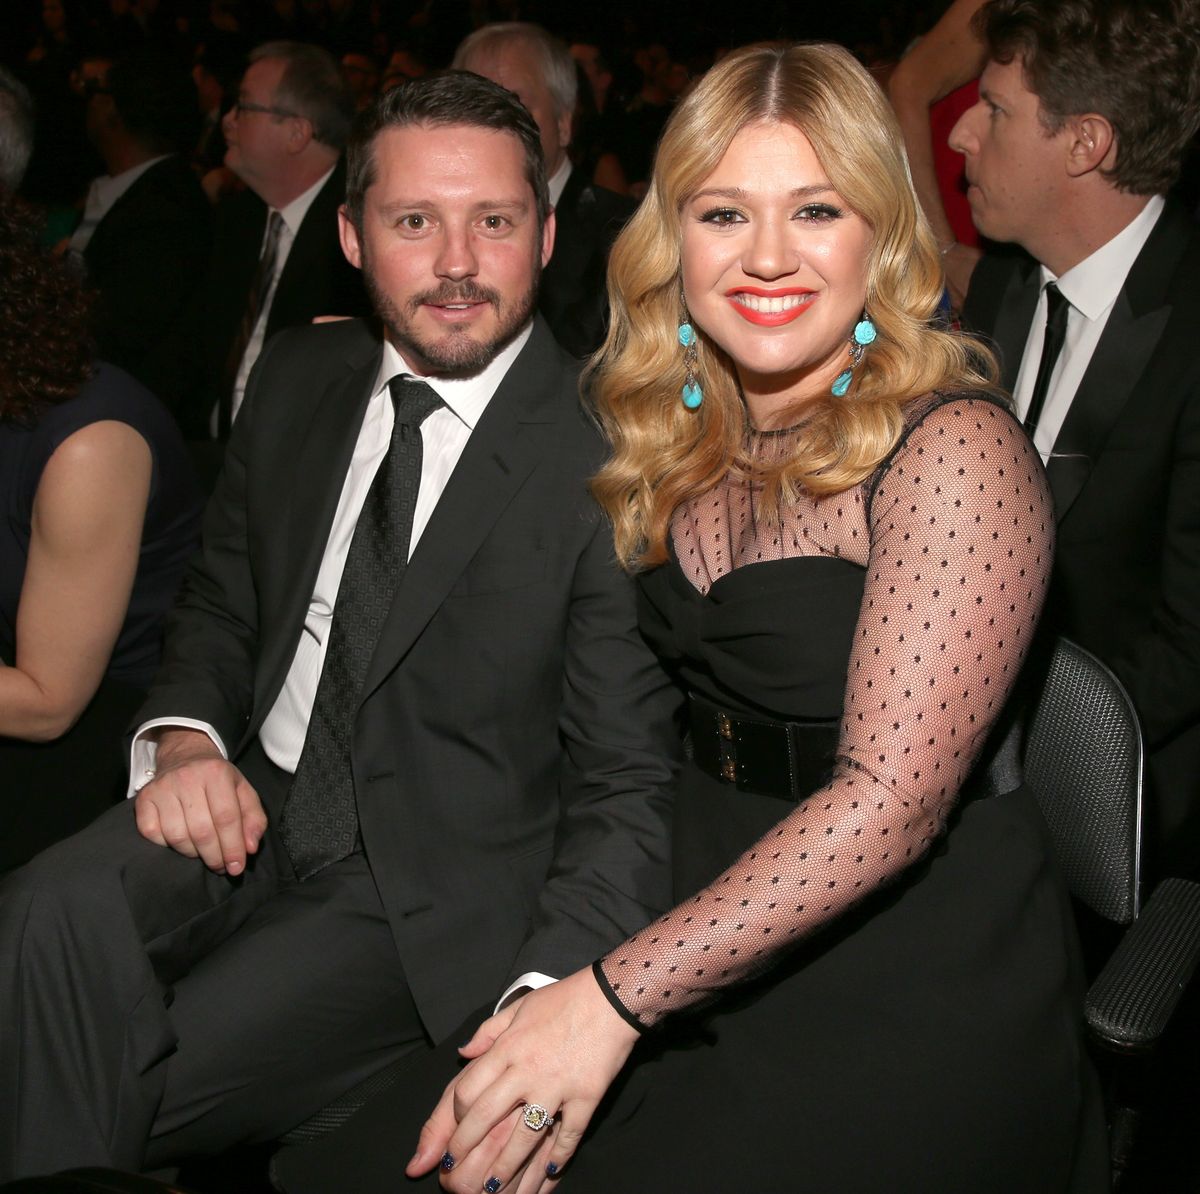 Rose Kelly Nude - Kelly Clarkson and Brandon Blackstock Have Super Hot Body Language